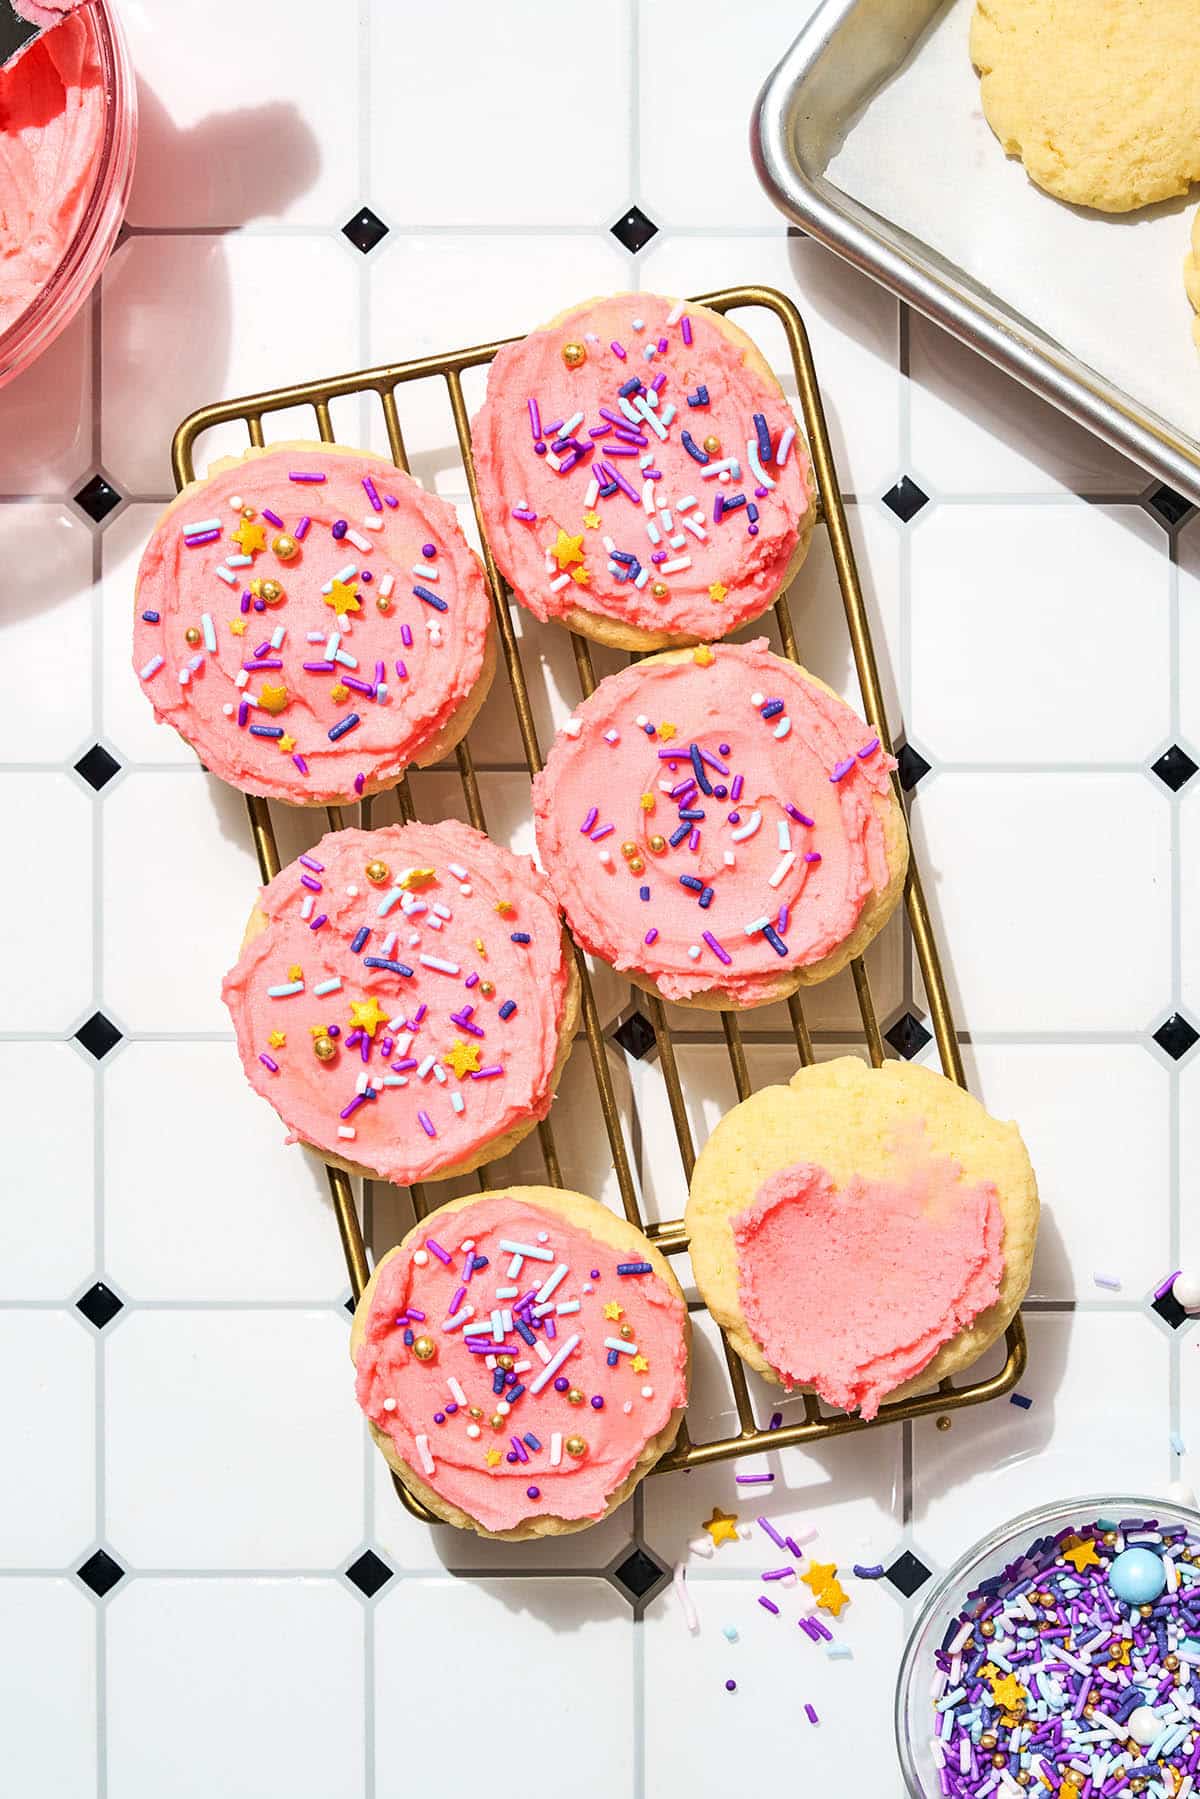 Cookies on a wire rack with pink frosting and sprinkles, top down view.